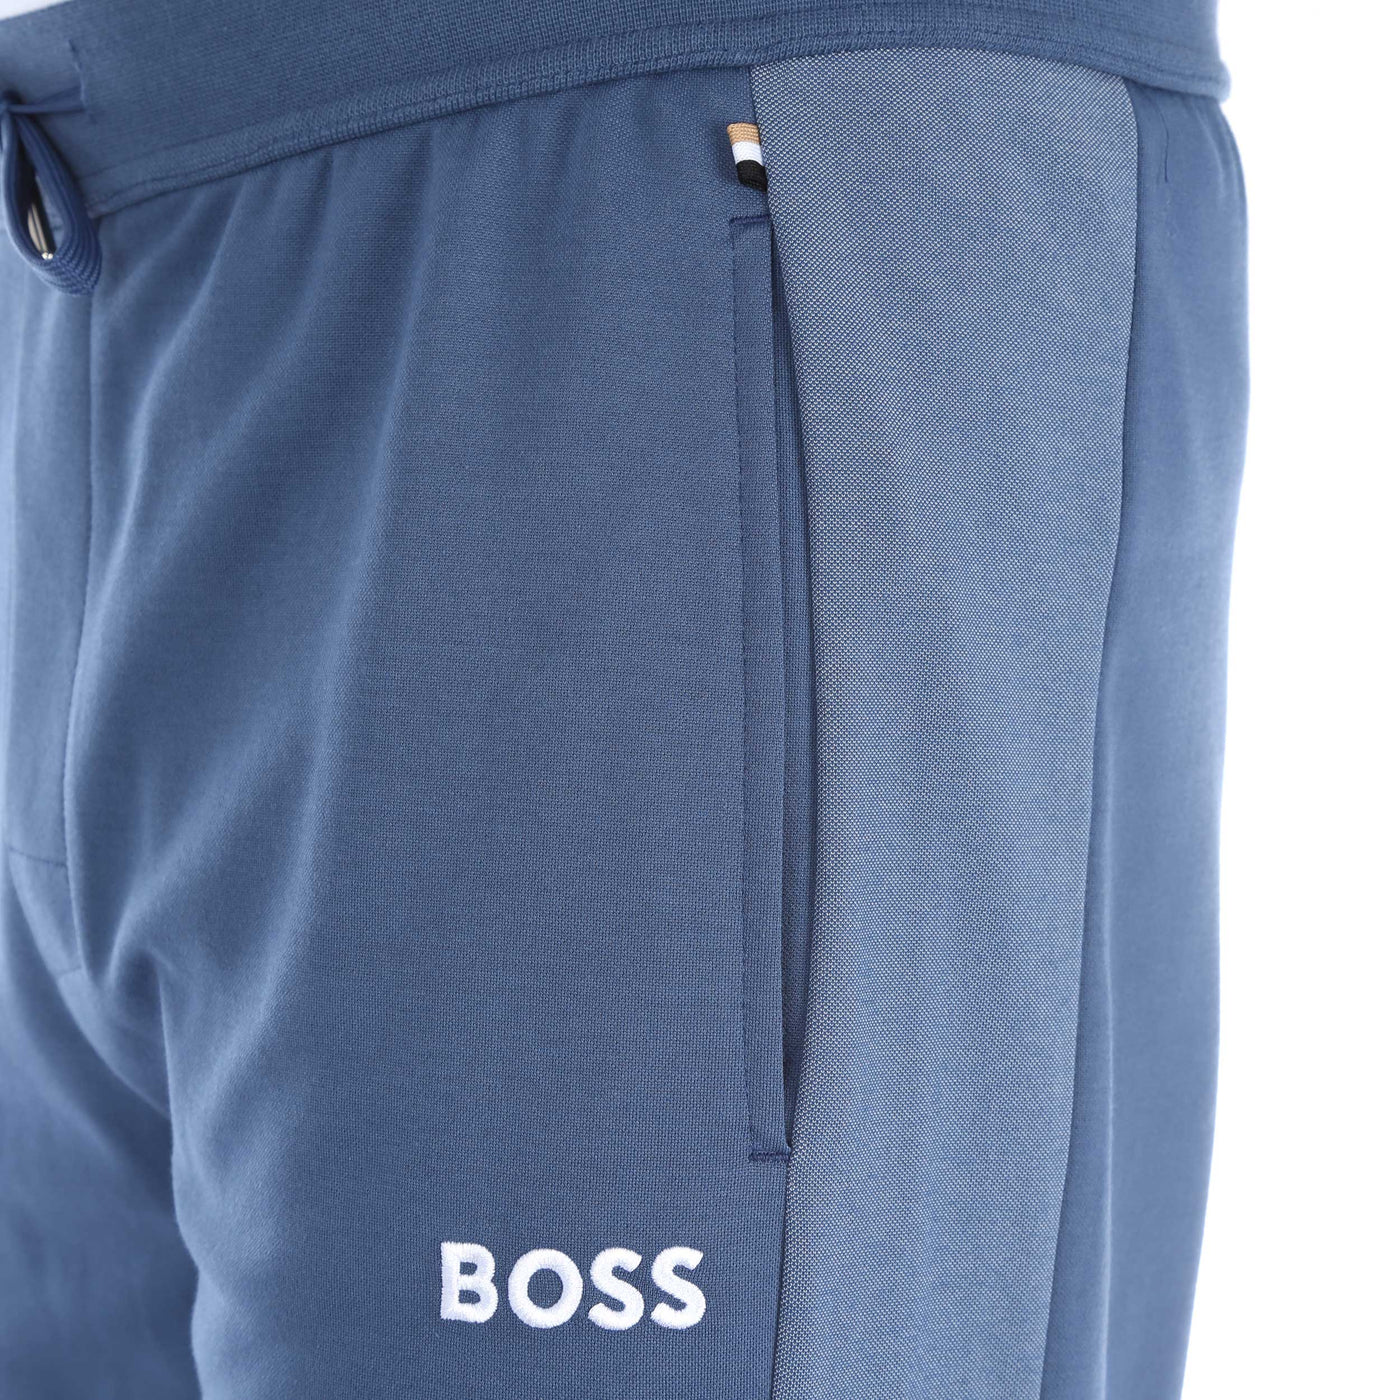 BOSS Tracksuit Sweat Pant in Navy